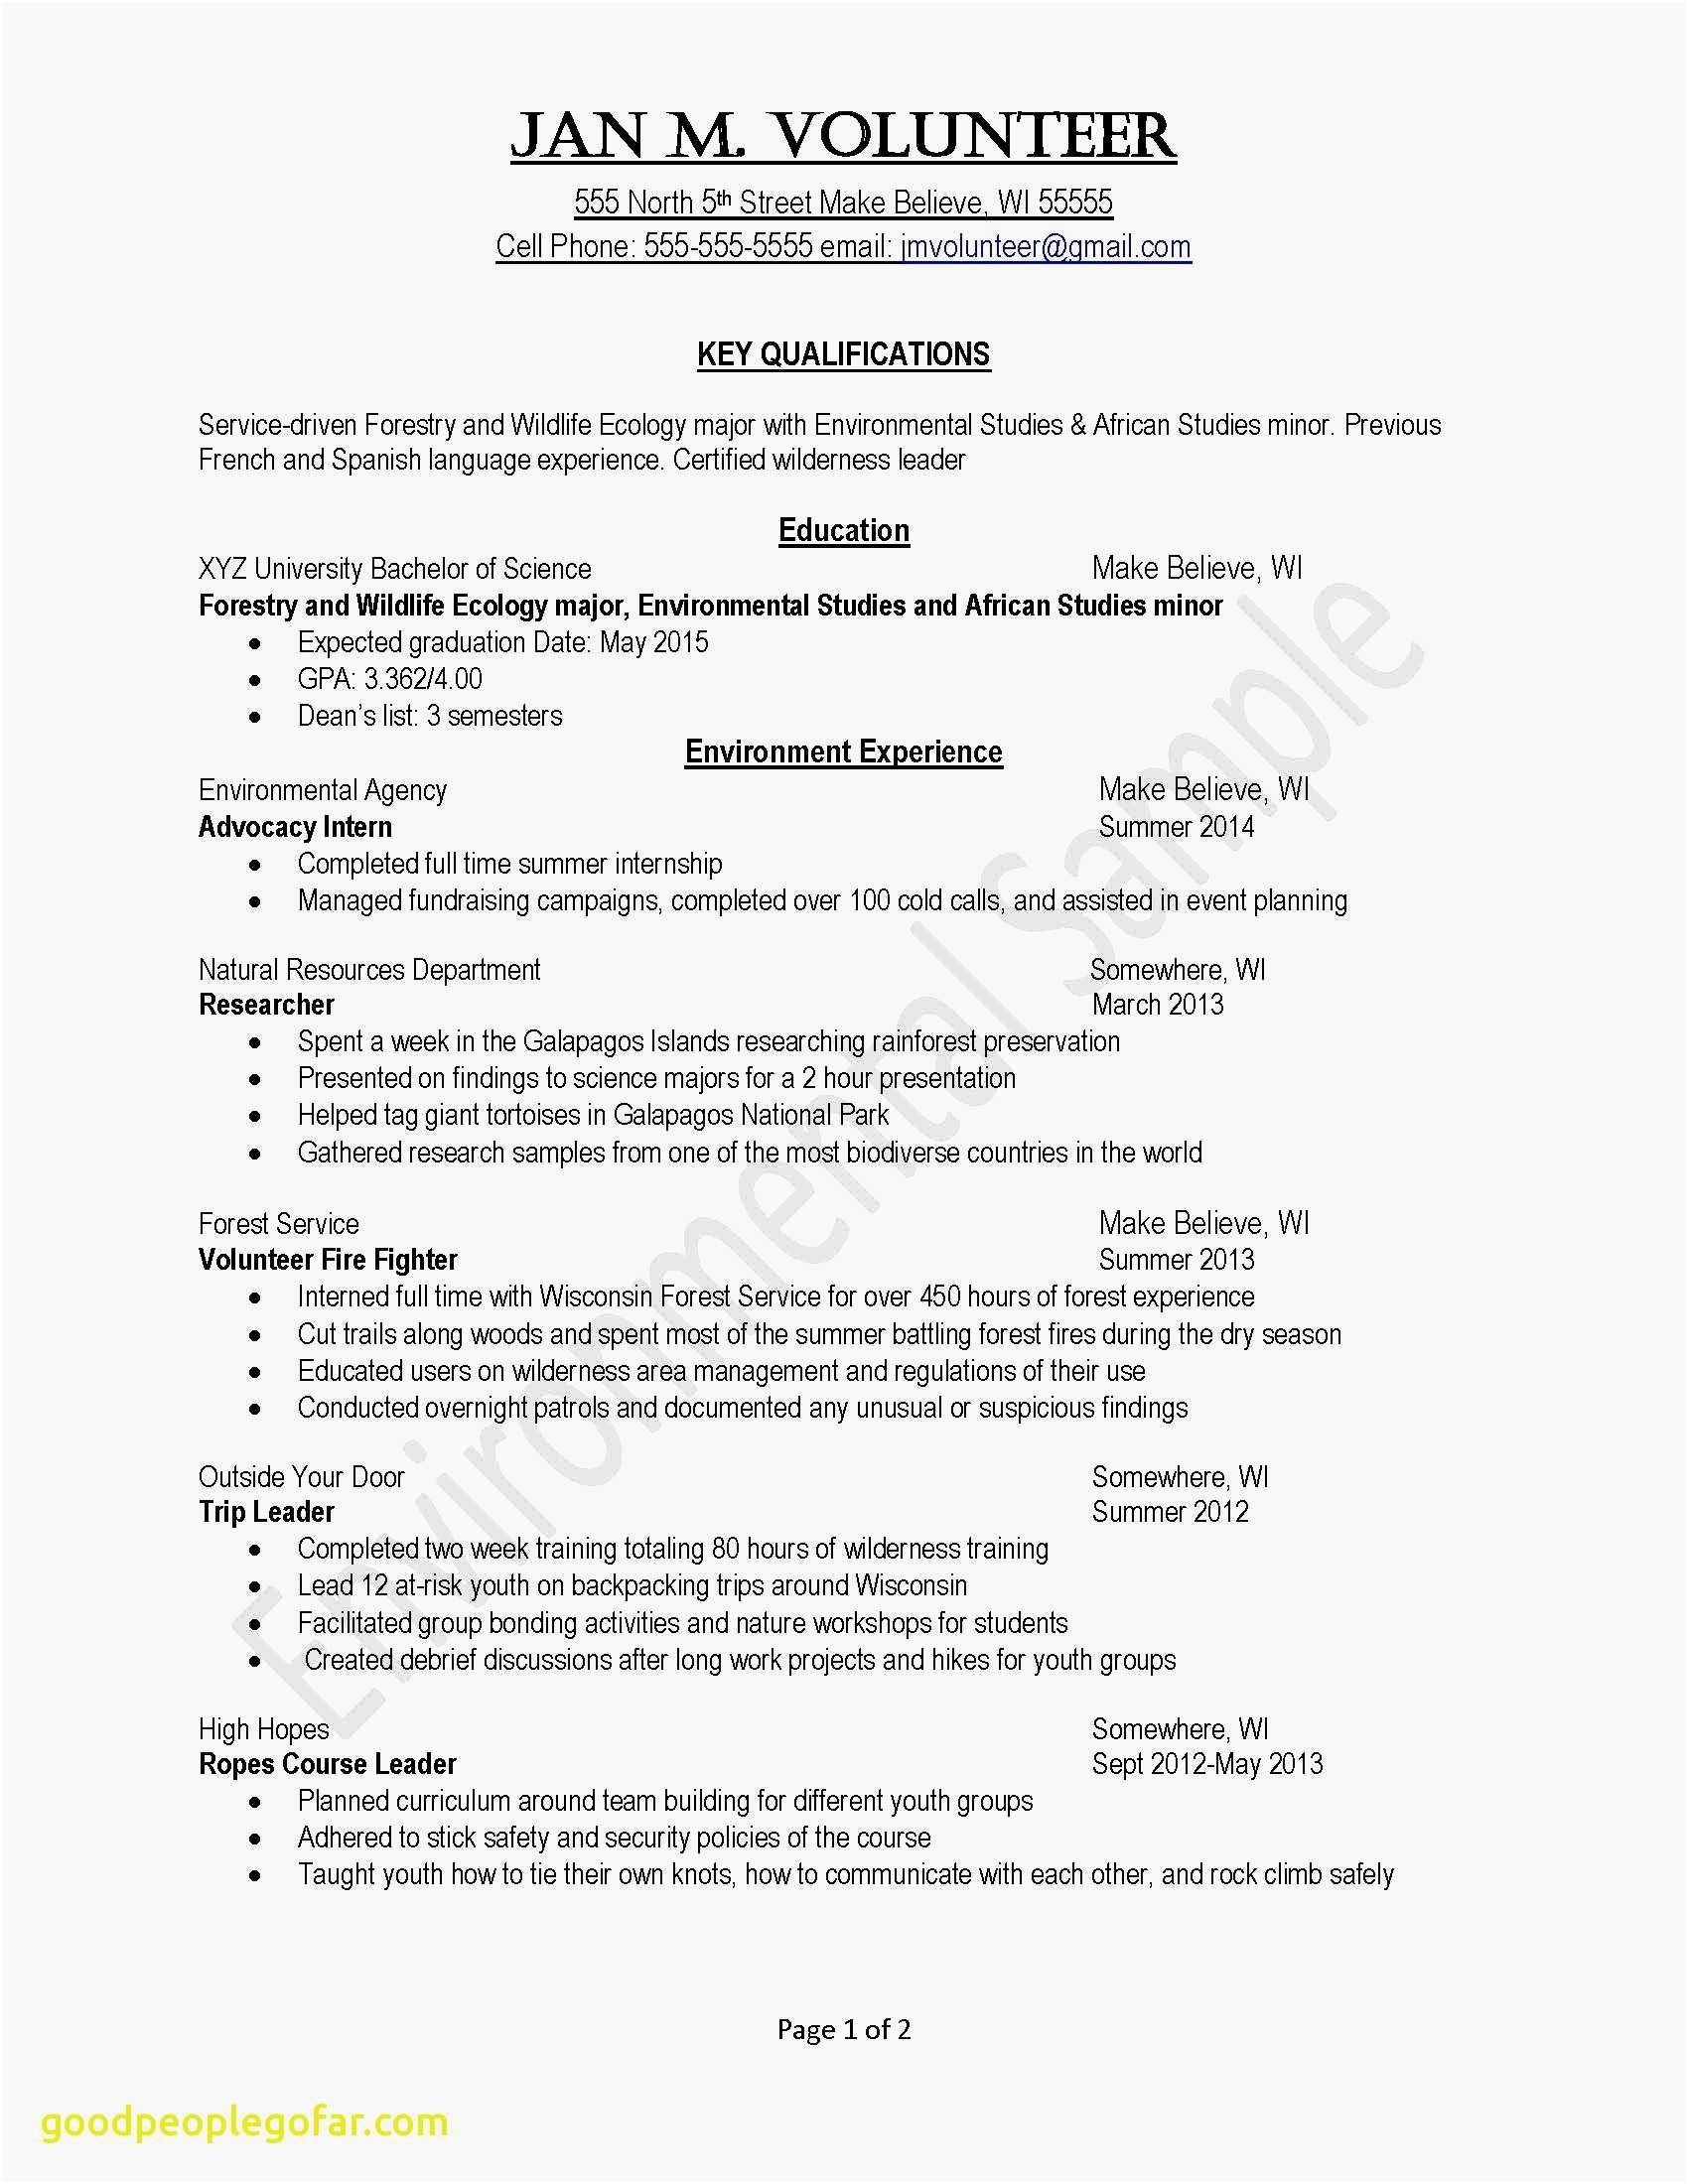 Letter or Recommendation Template - Best Examples Letter Re Mendation Template